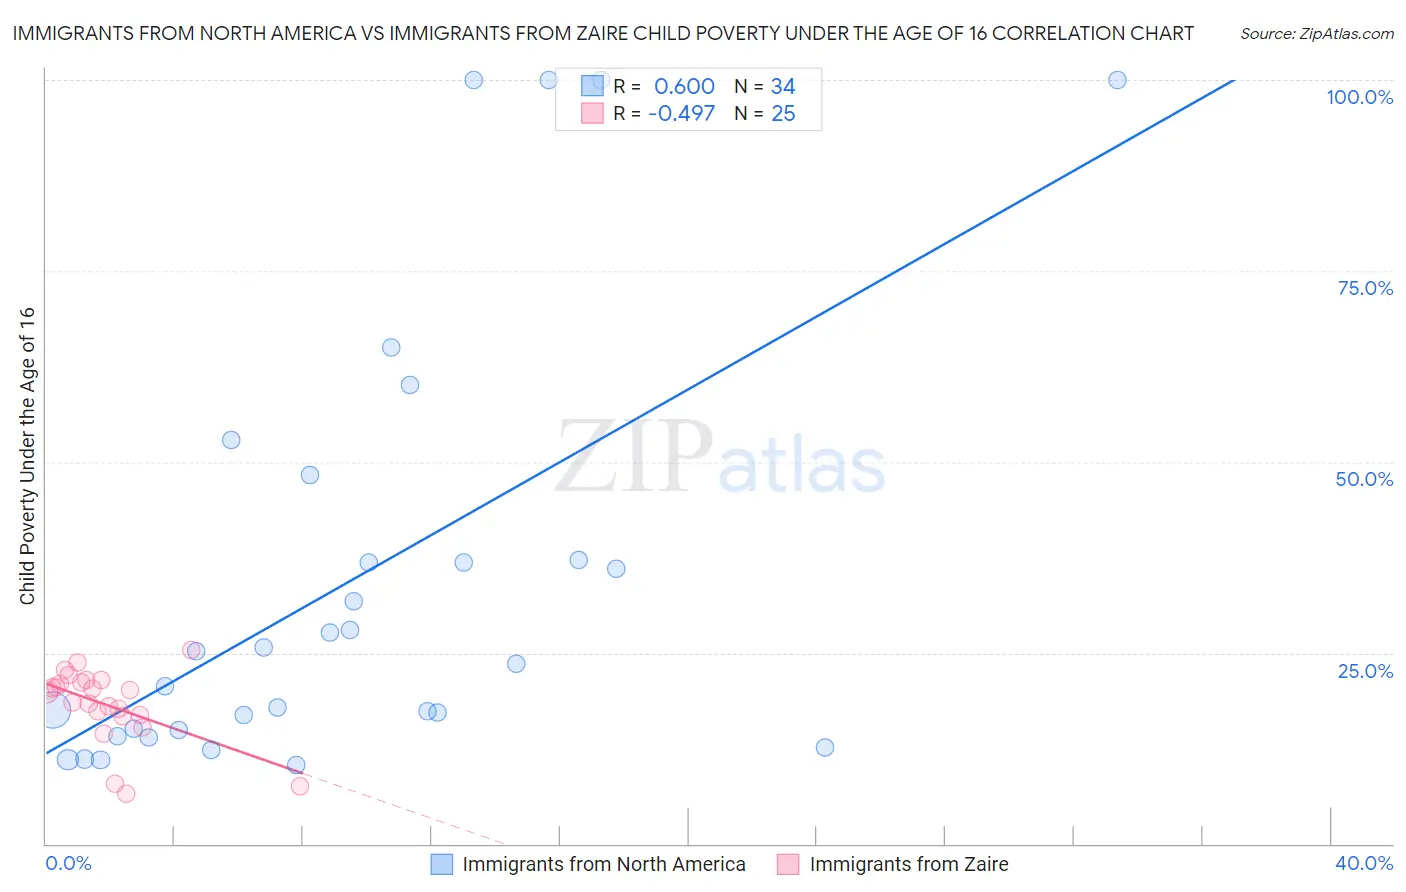 Immigrants from North America vs Immigrants from Zaire Child Poverty Under the Age of 16